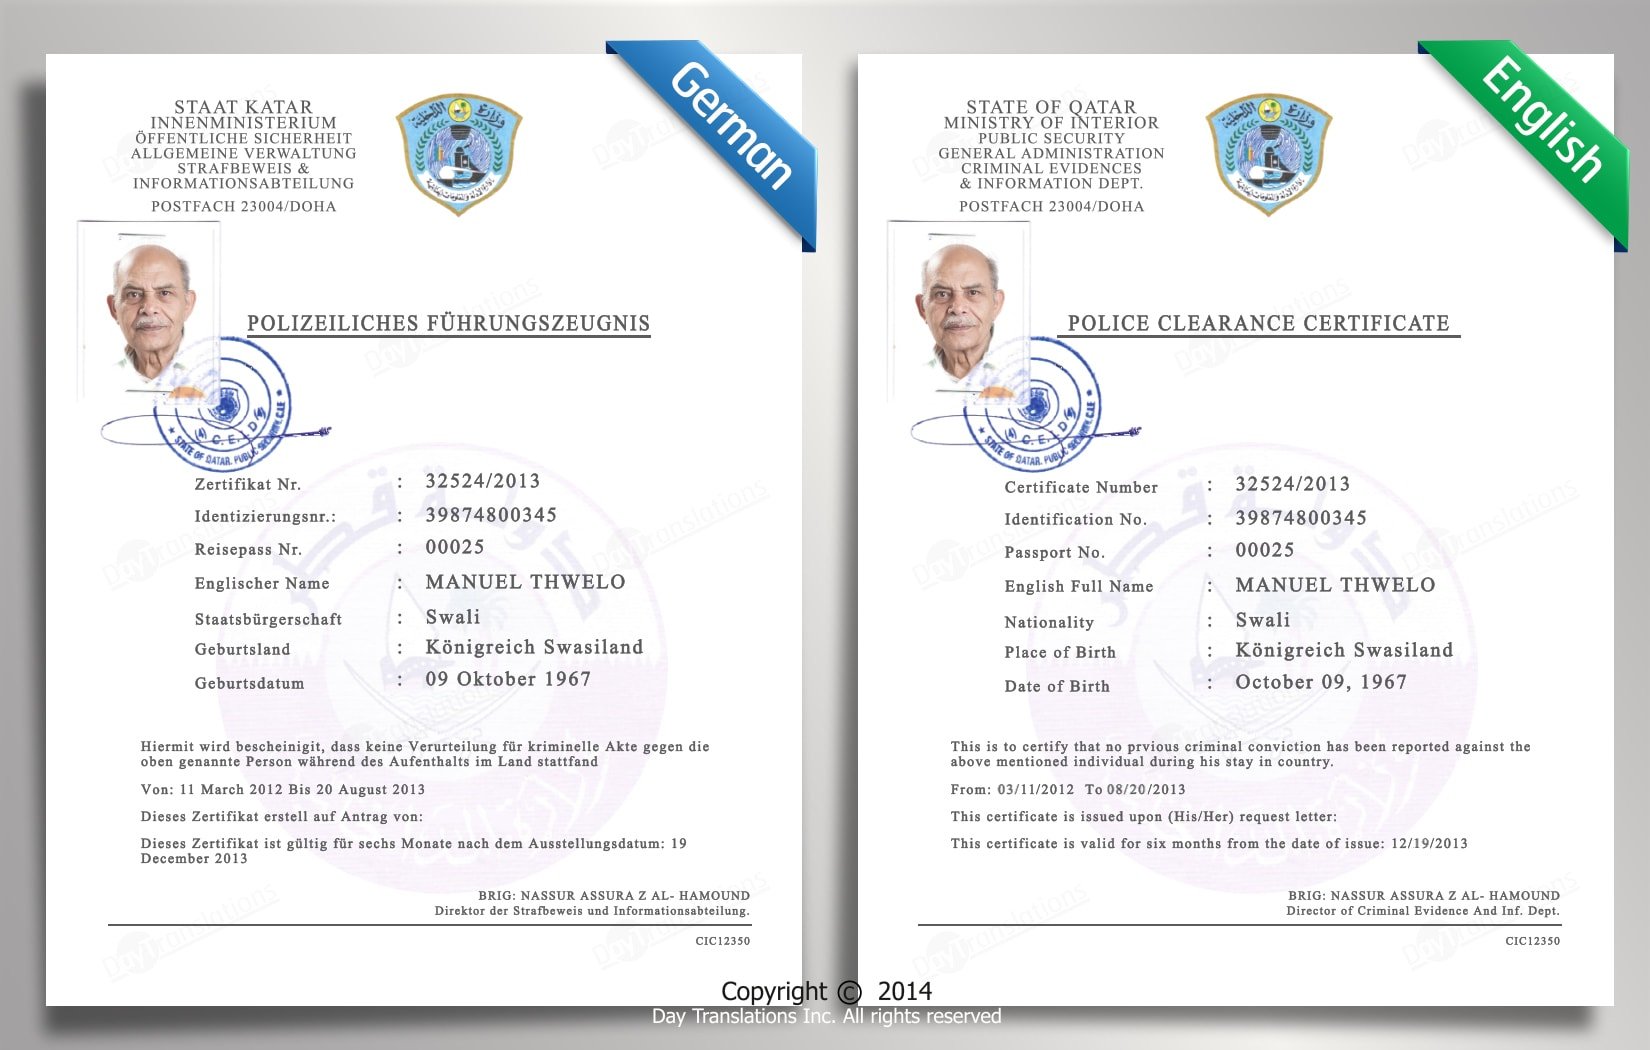 German to English Police Clearance Certificate